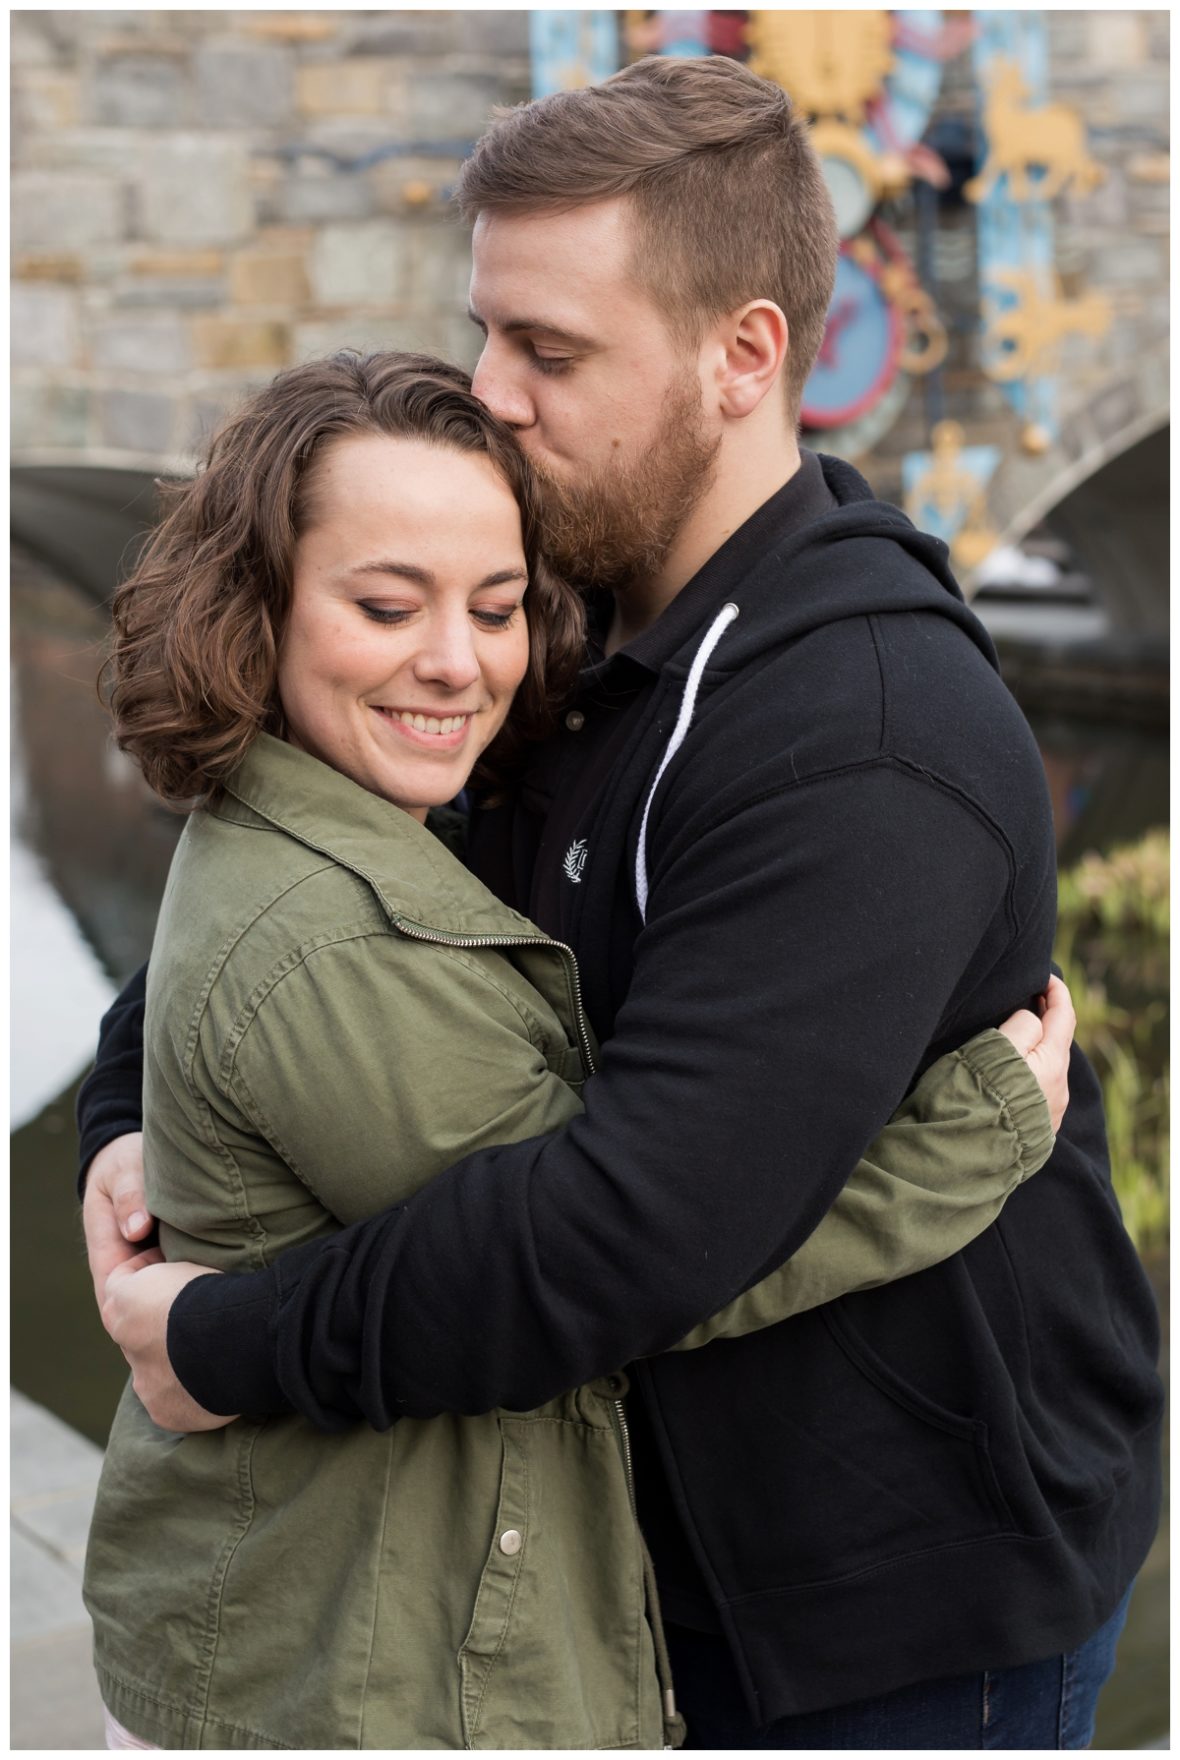 Engaged Couple with Disney Themed Frederick Maryland Engagement Photos by the bridge